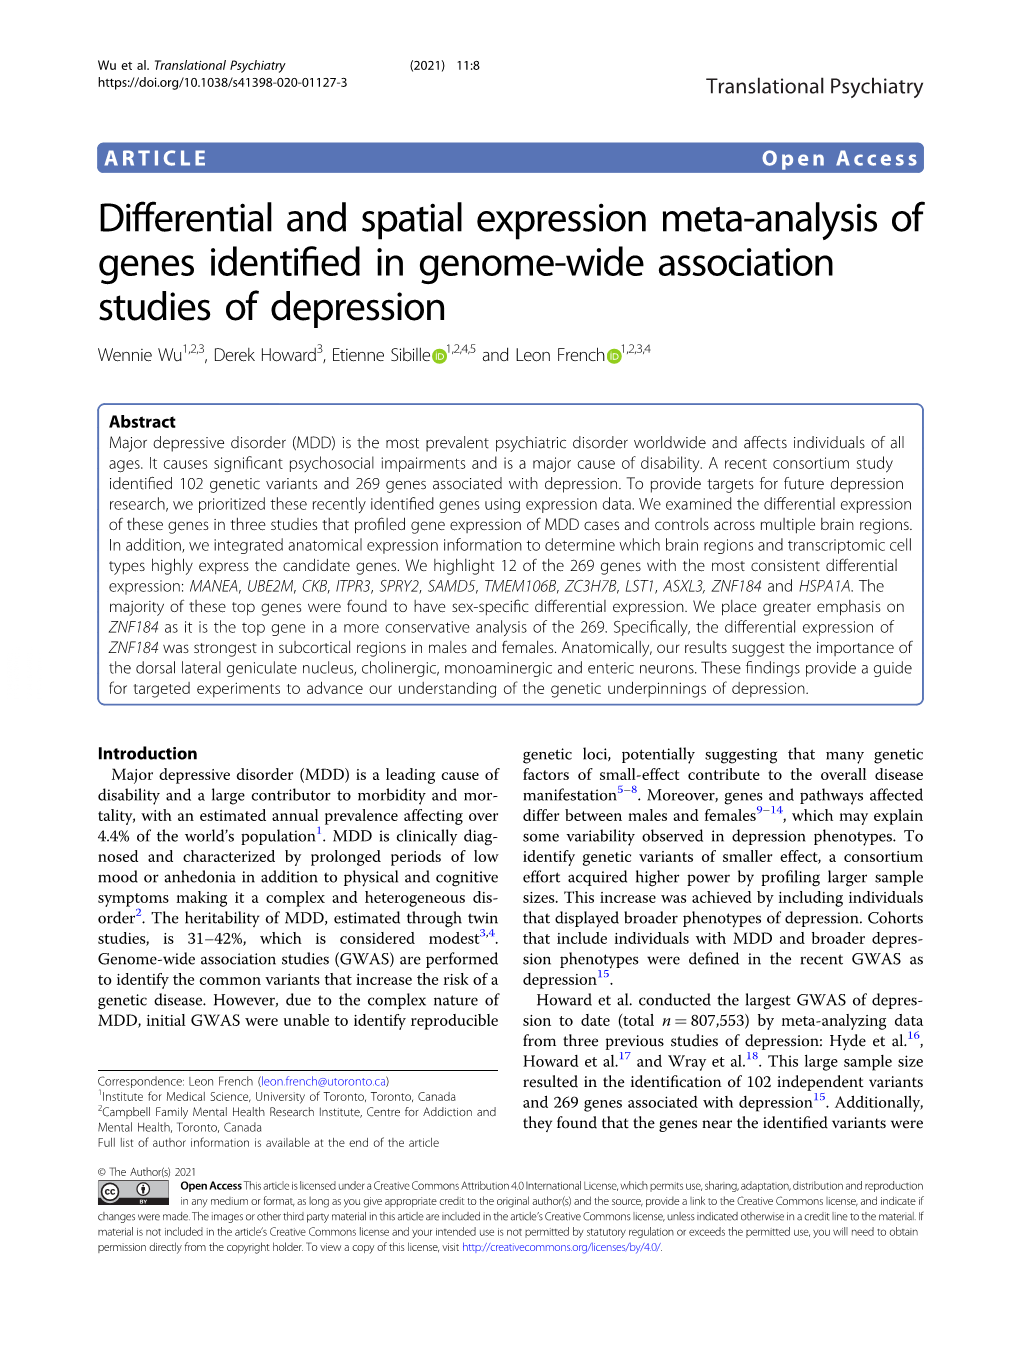 Differential and Spatial Expression Meta-Analysis of Genes